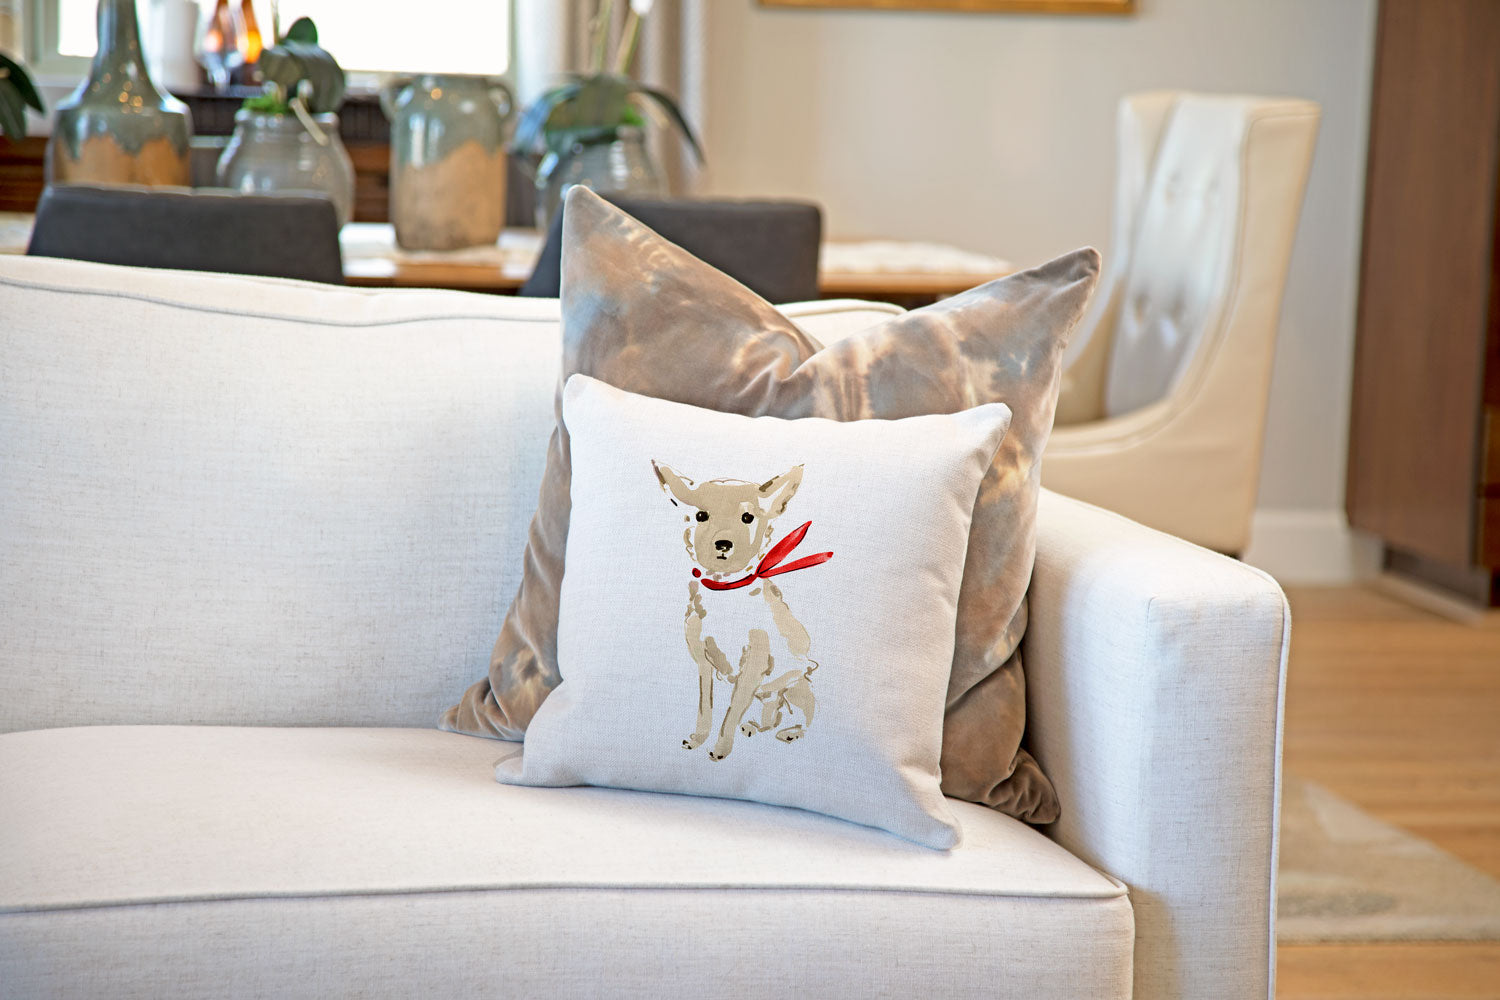 Caesar Chihuahua Throw Pillow Cover - Dog Illustration Throw Pillow Cover Collection-Di Lewis